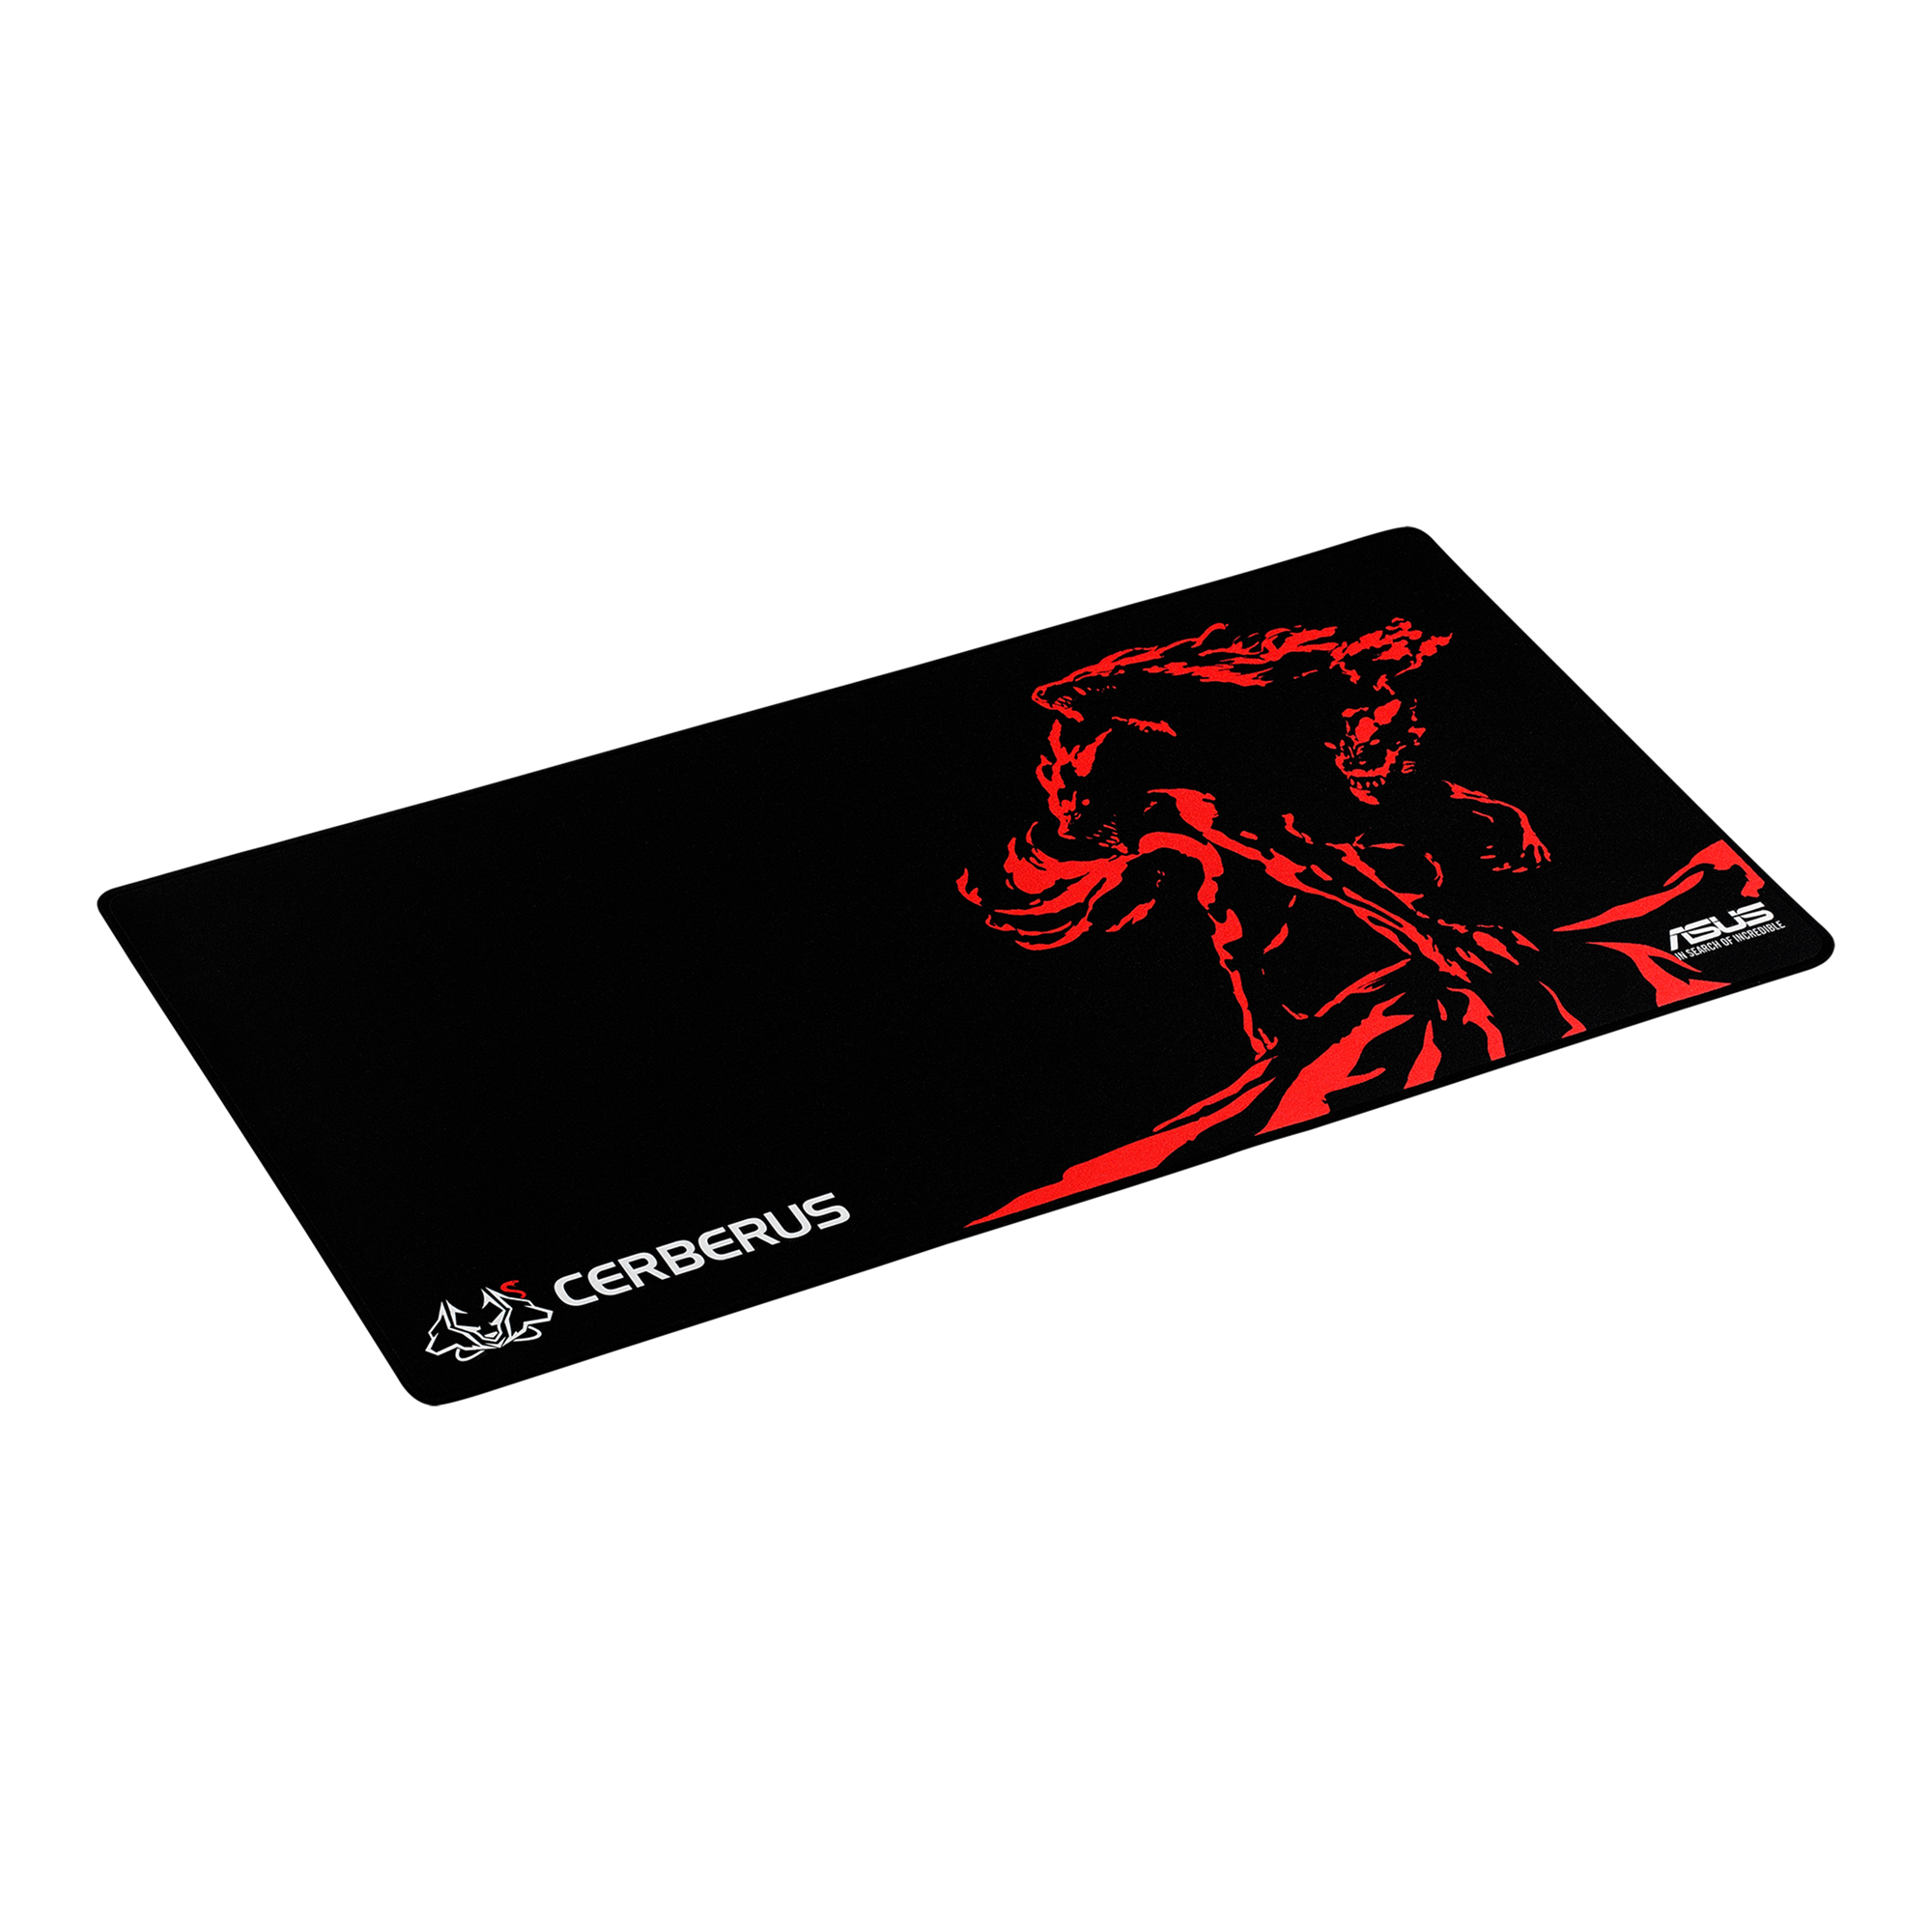 Cerberus Mat Gaming Mouse Pad Series Mice And Mouse Pads Asus Global